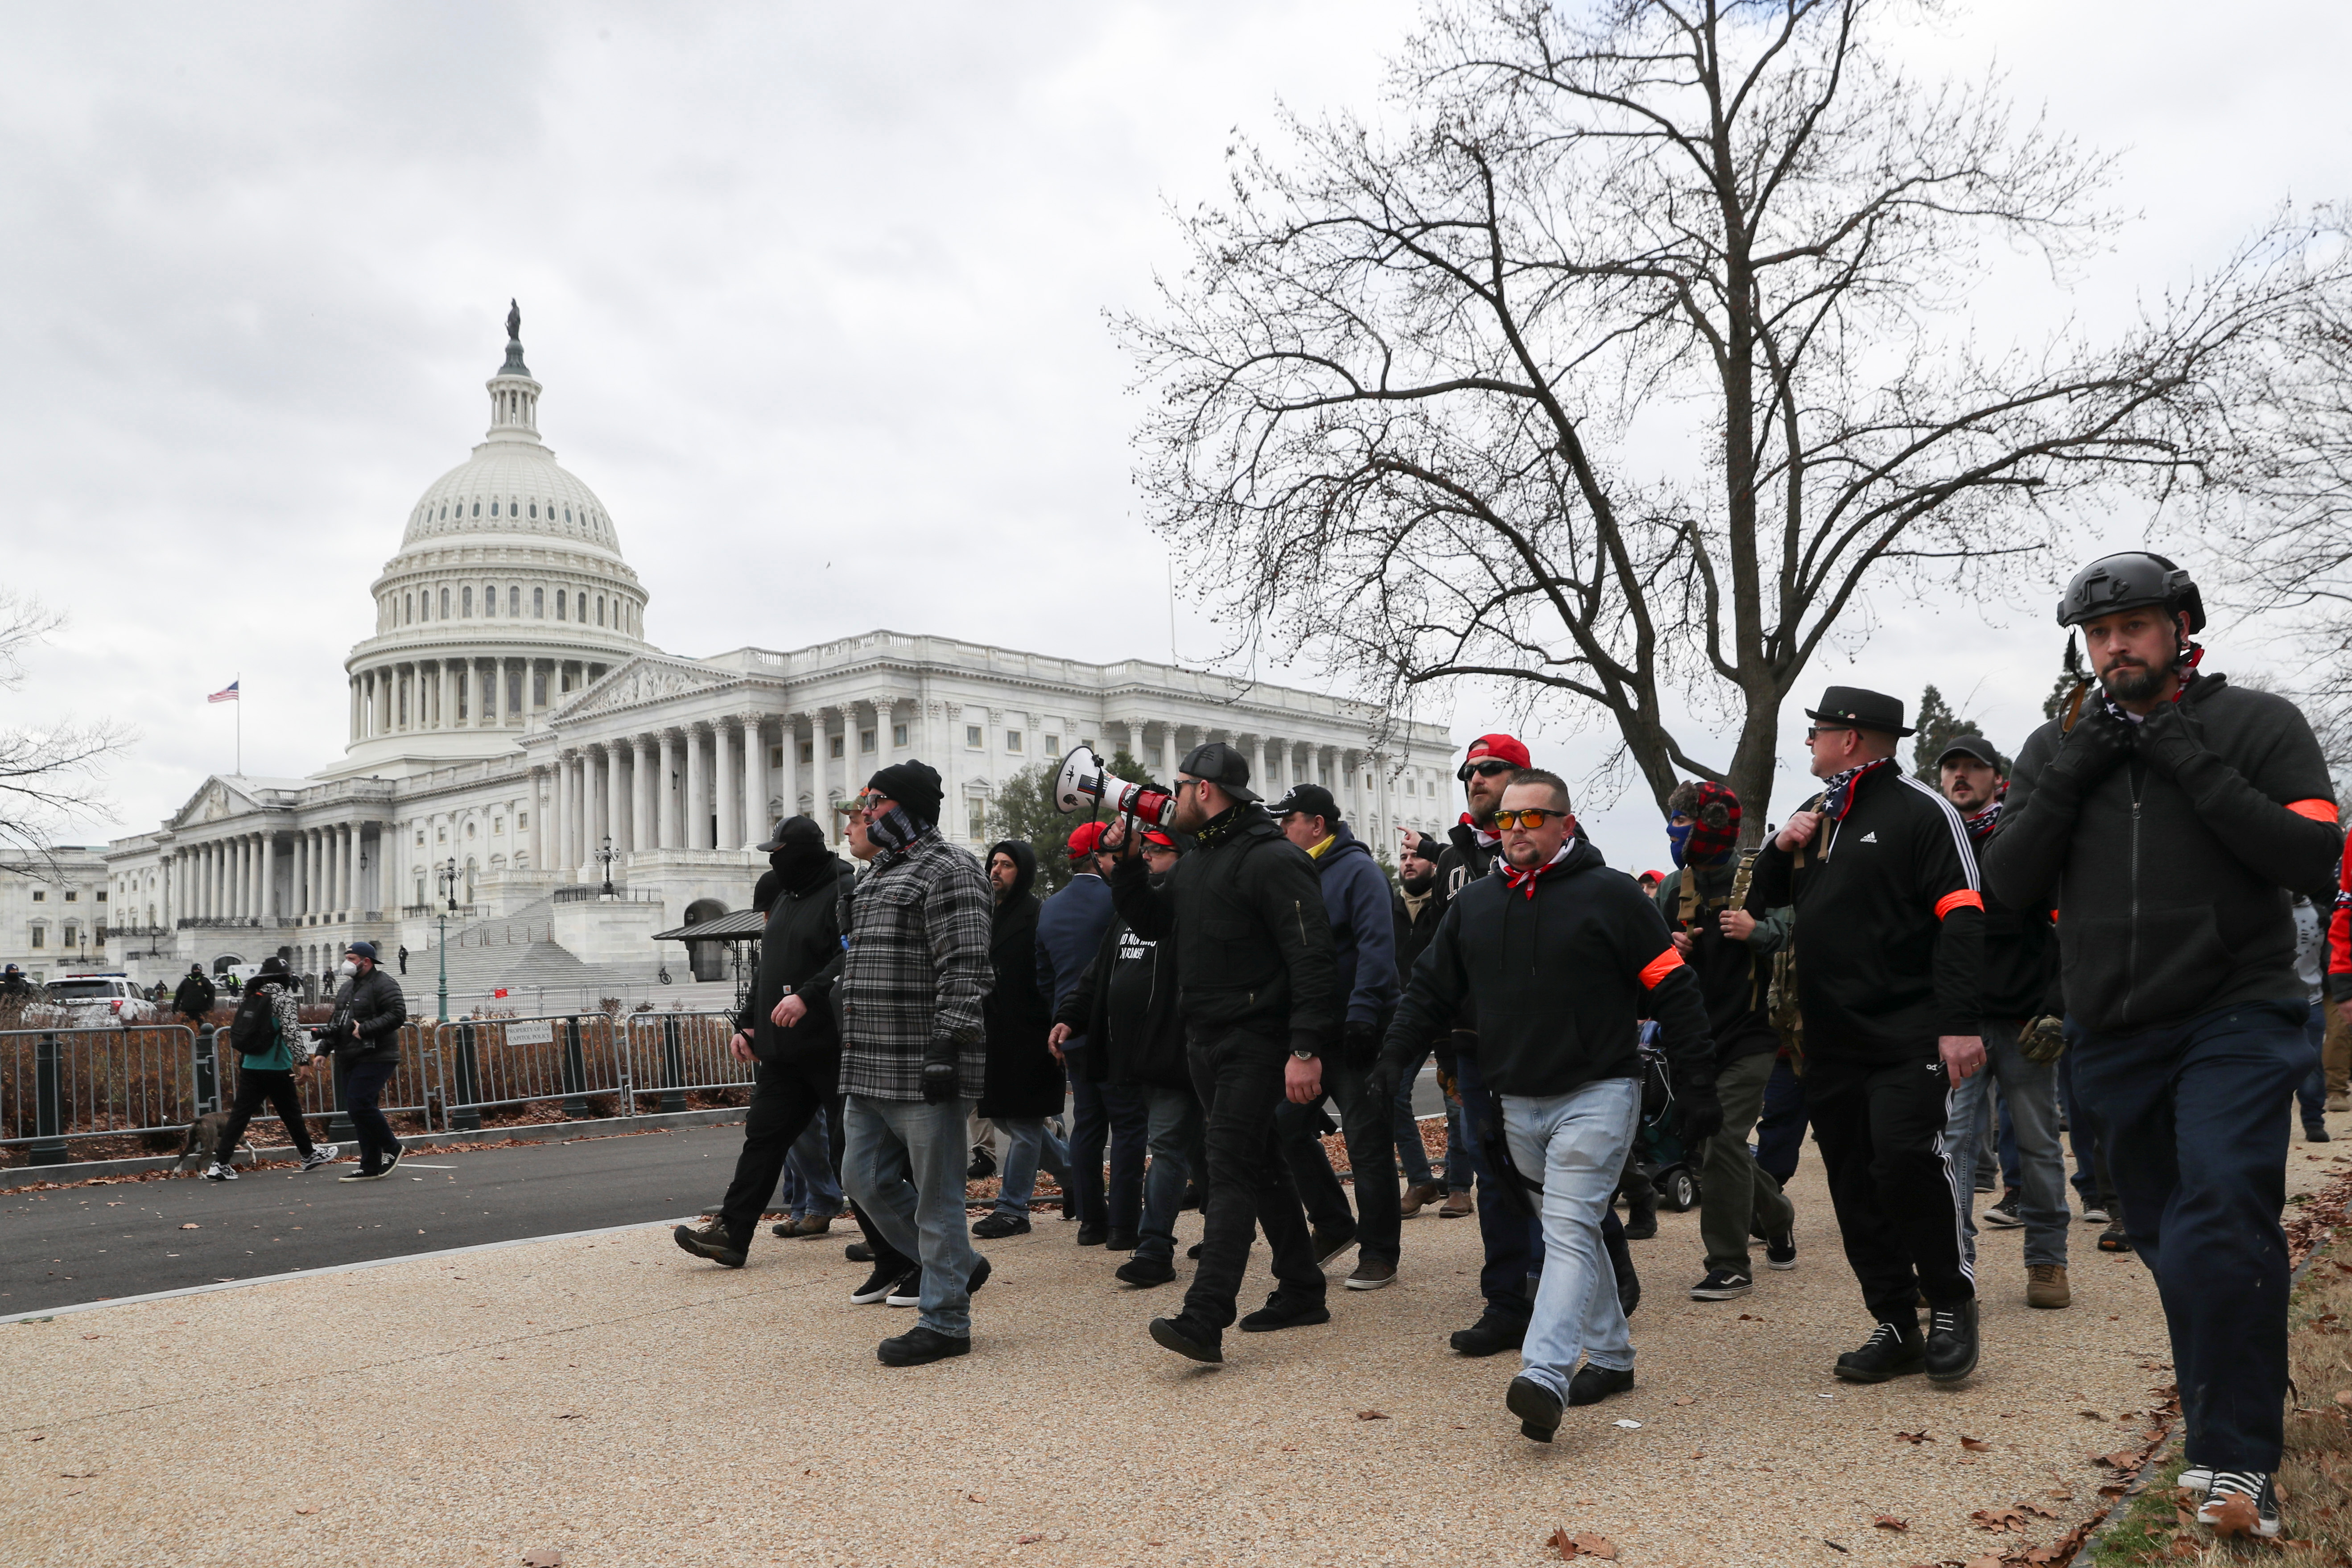 Members of the the far-right group Proud Boys march to the U.S. Capitol Building in Washington